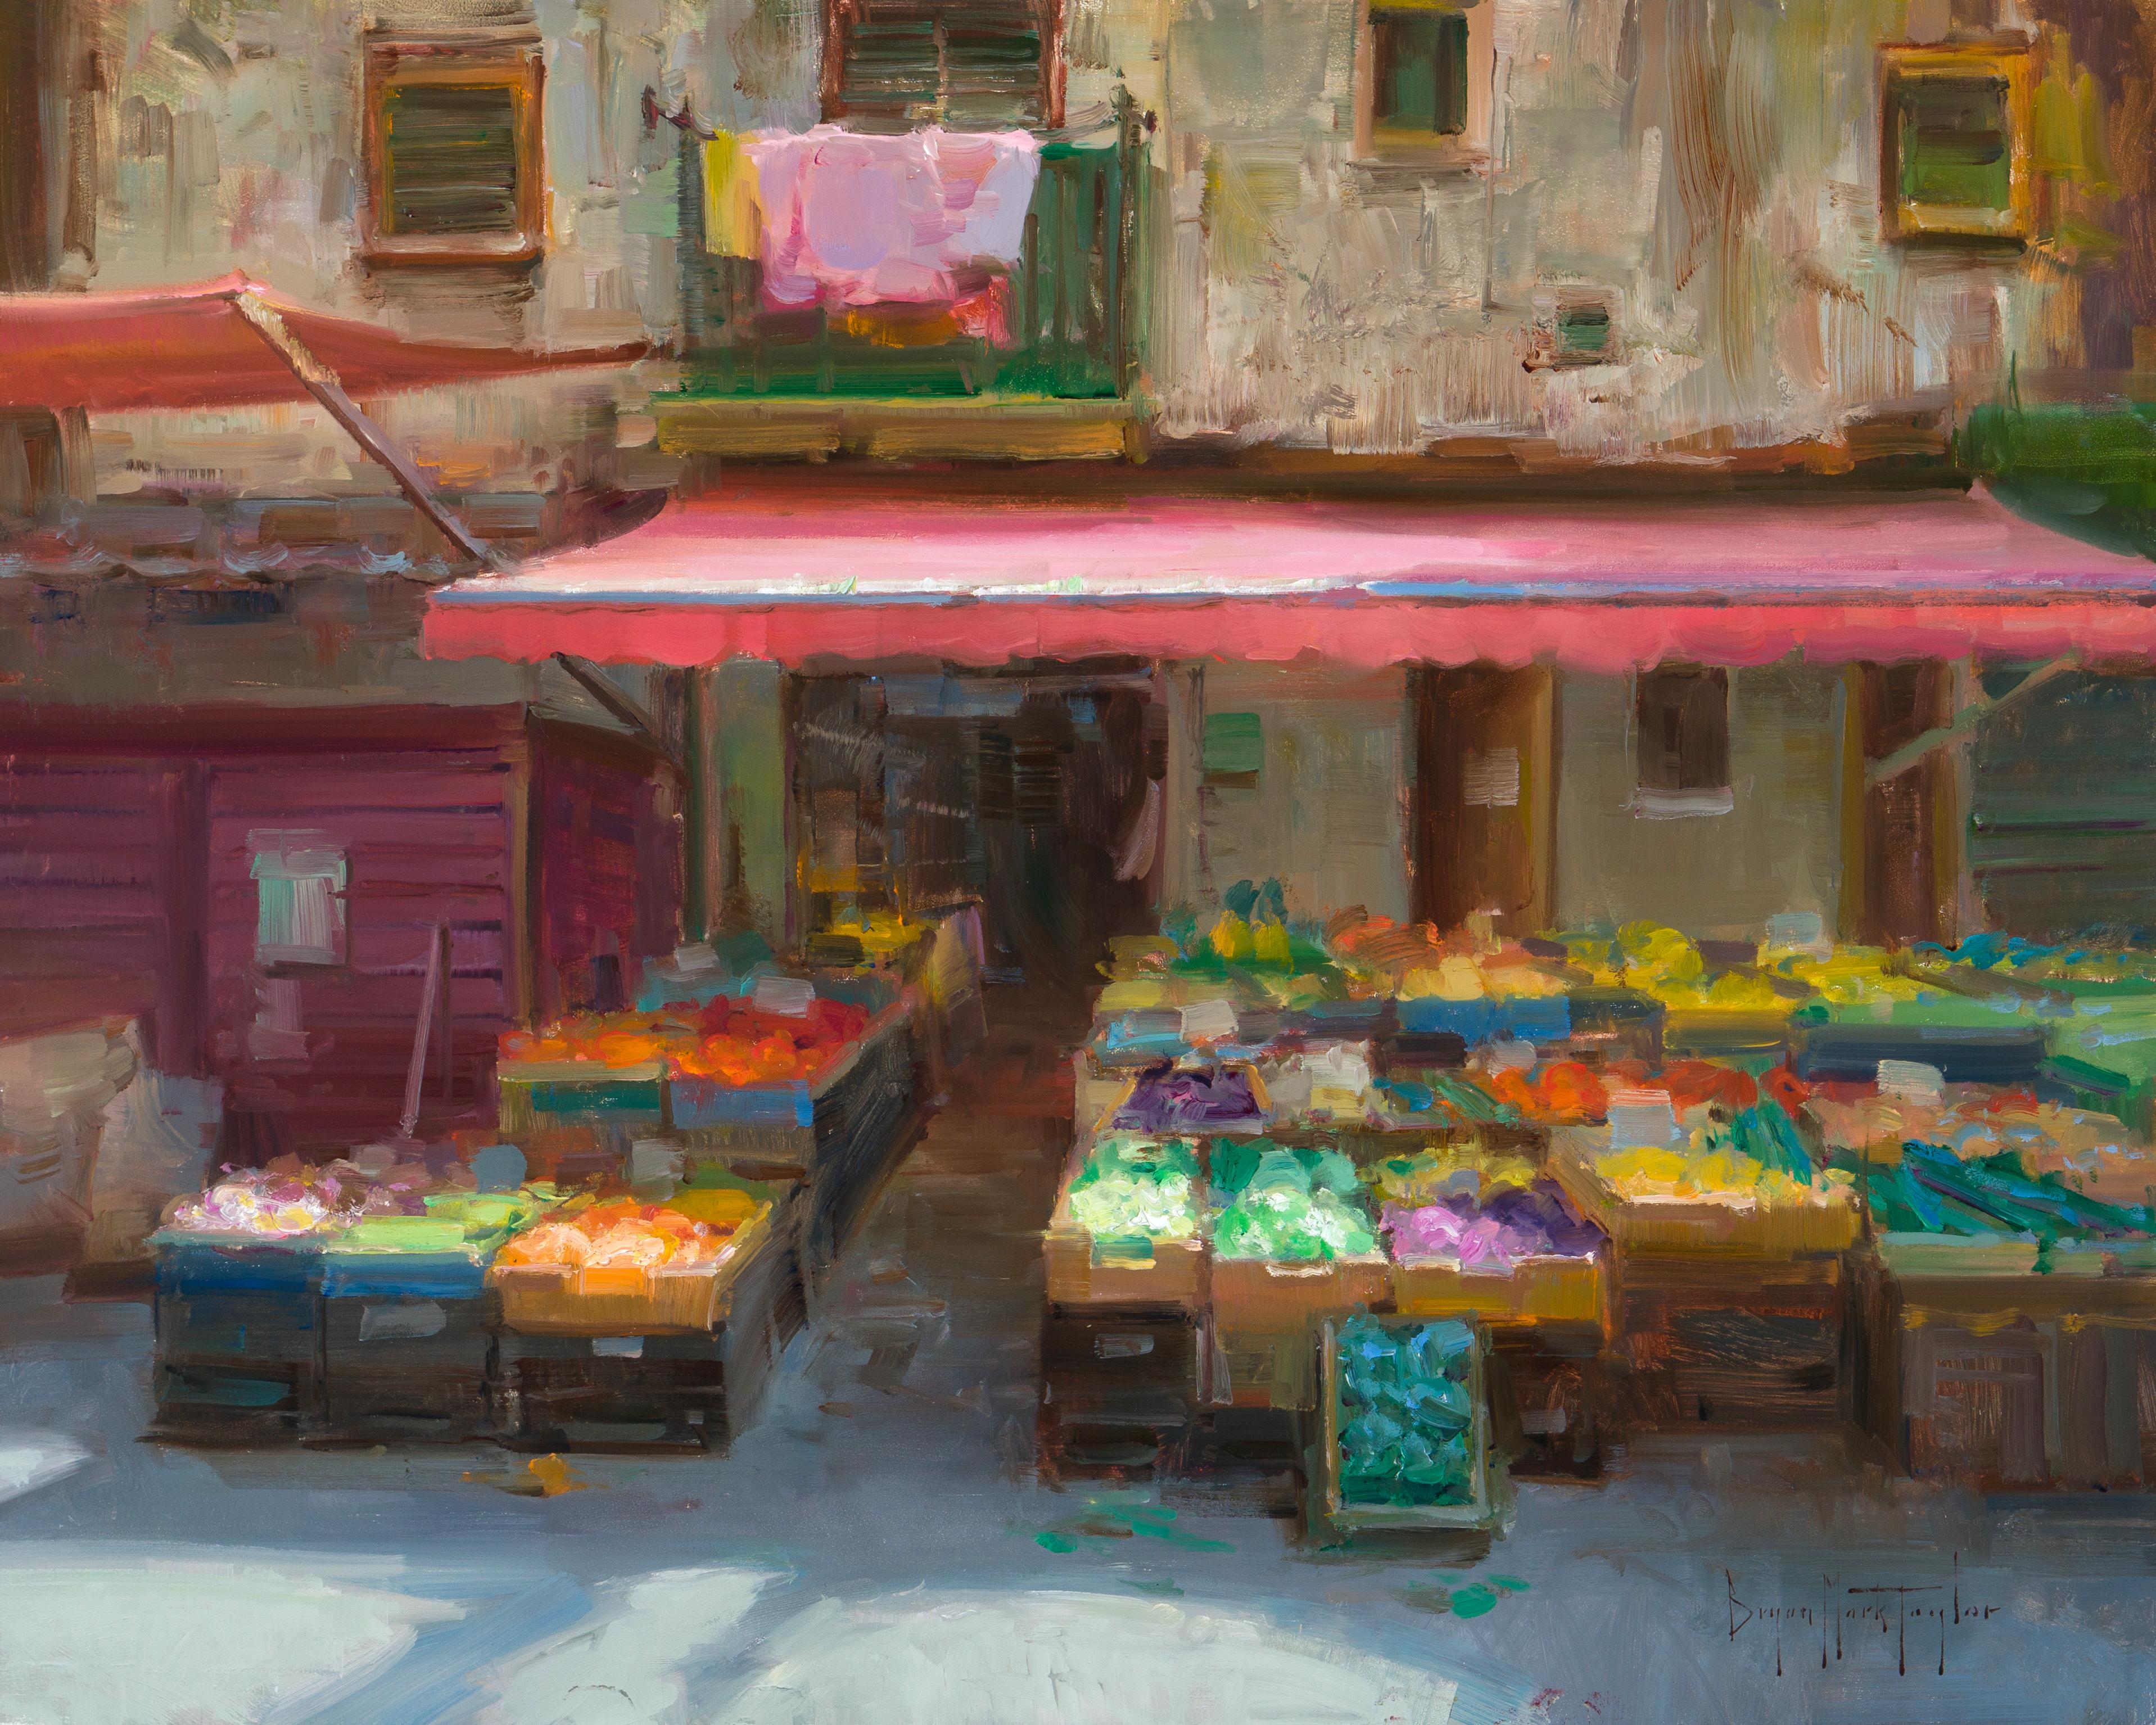 Bryan Mark Taylor Landscape Painting - "Laundry Day, Market Day" Oil Painting